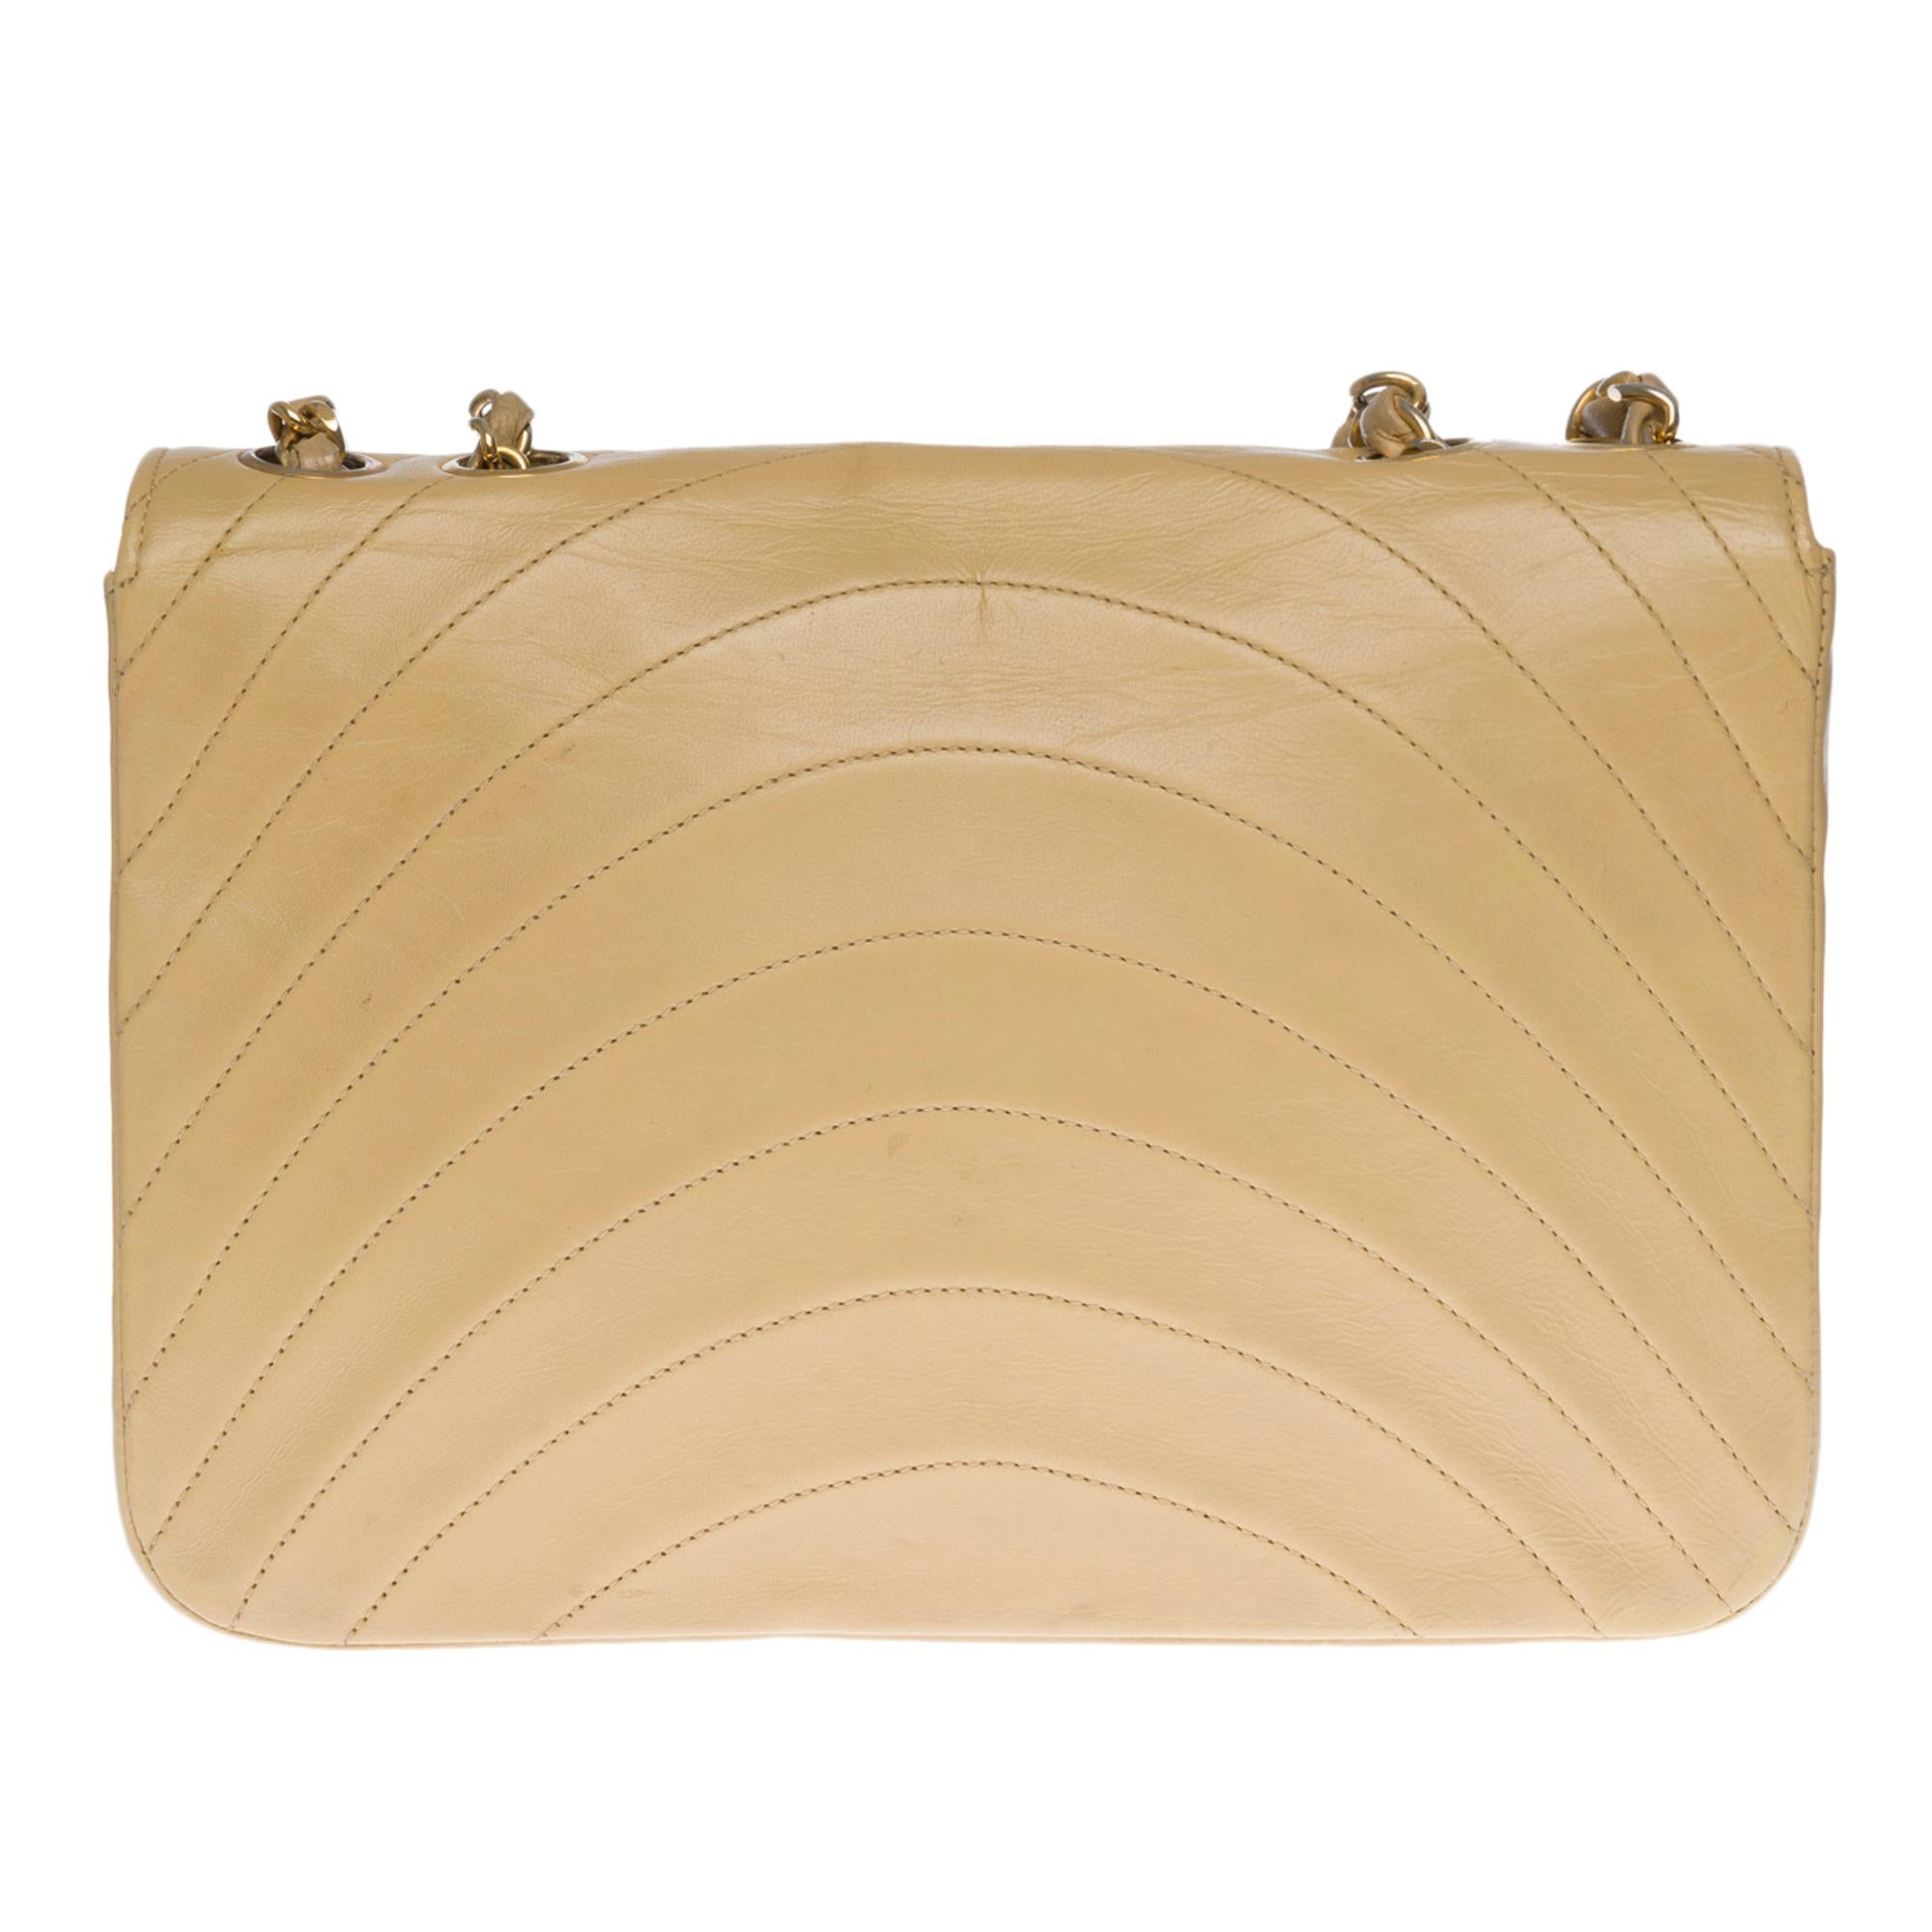 Splendid Chanel Mini Classic bag in beige quilted leather, gold-tone metal trim, gold-tone metal chain handle intertwined with beige leather for a hand, shoulder or shoulder strap.
Closure by flap and turnstile, CC gold metal.
Beige leather